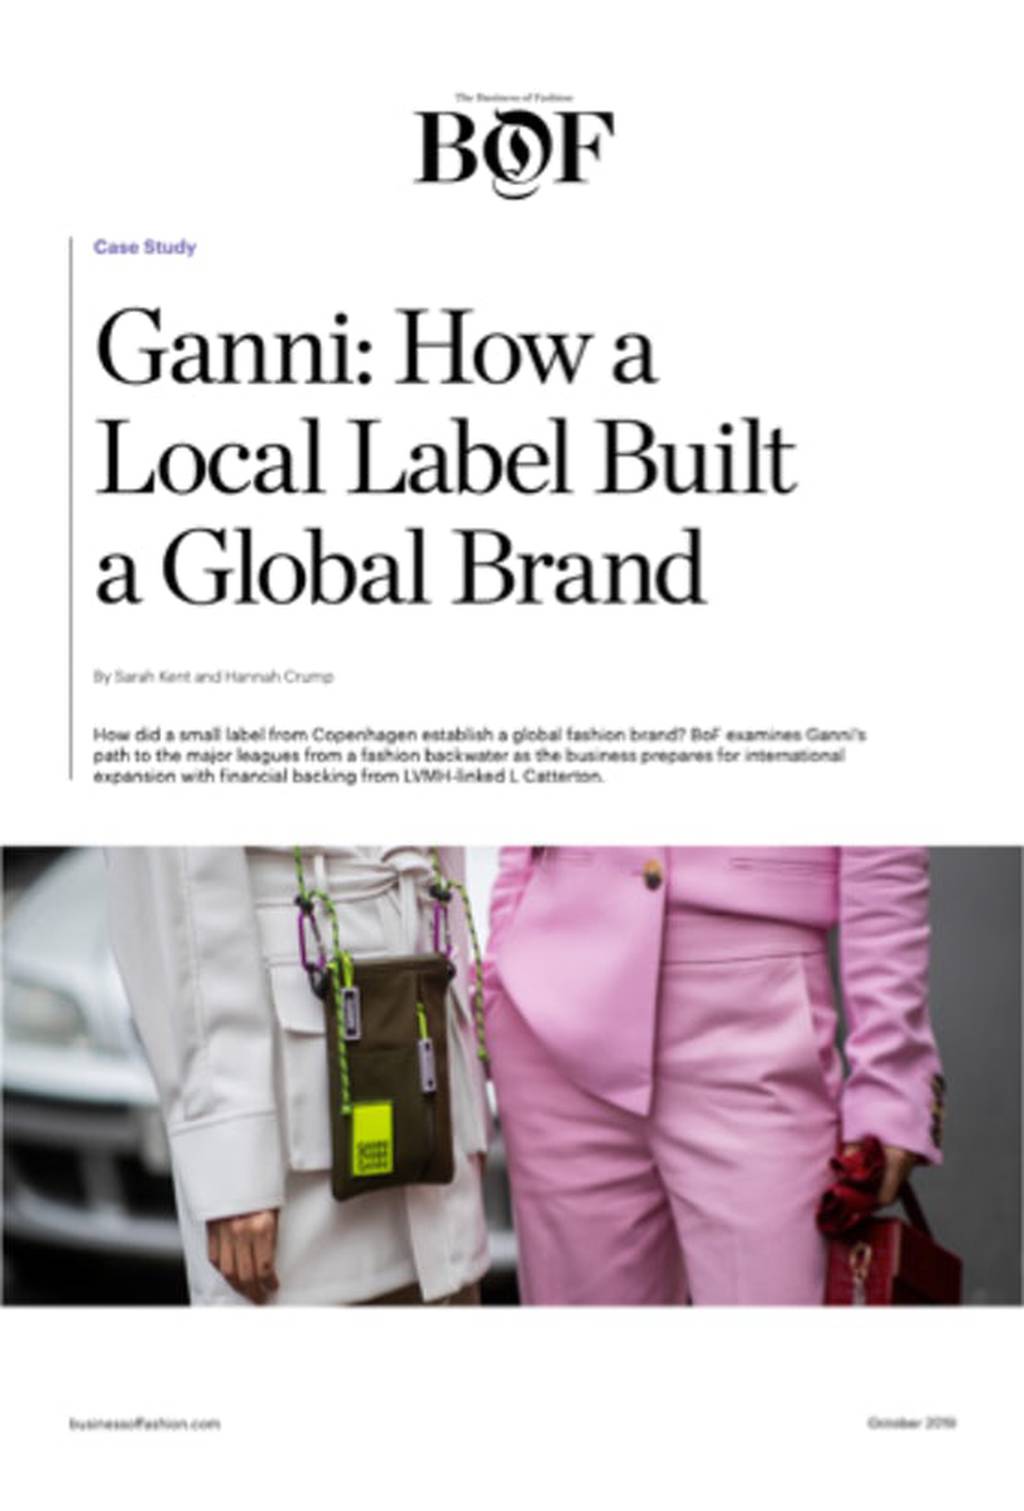 How a Local Label Built a Global Brand